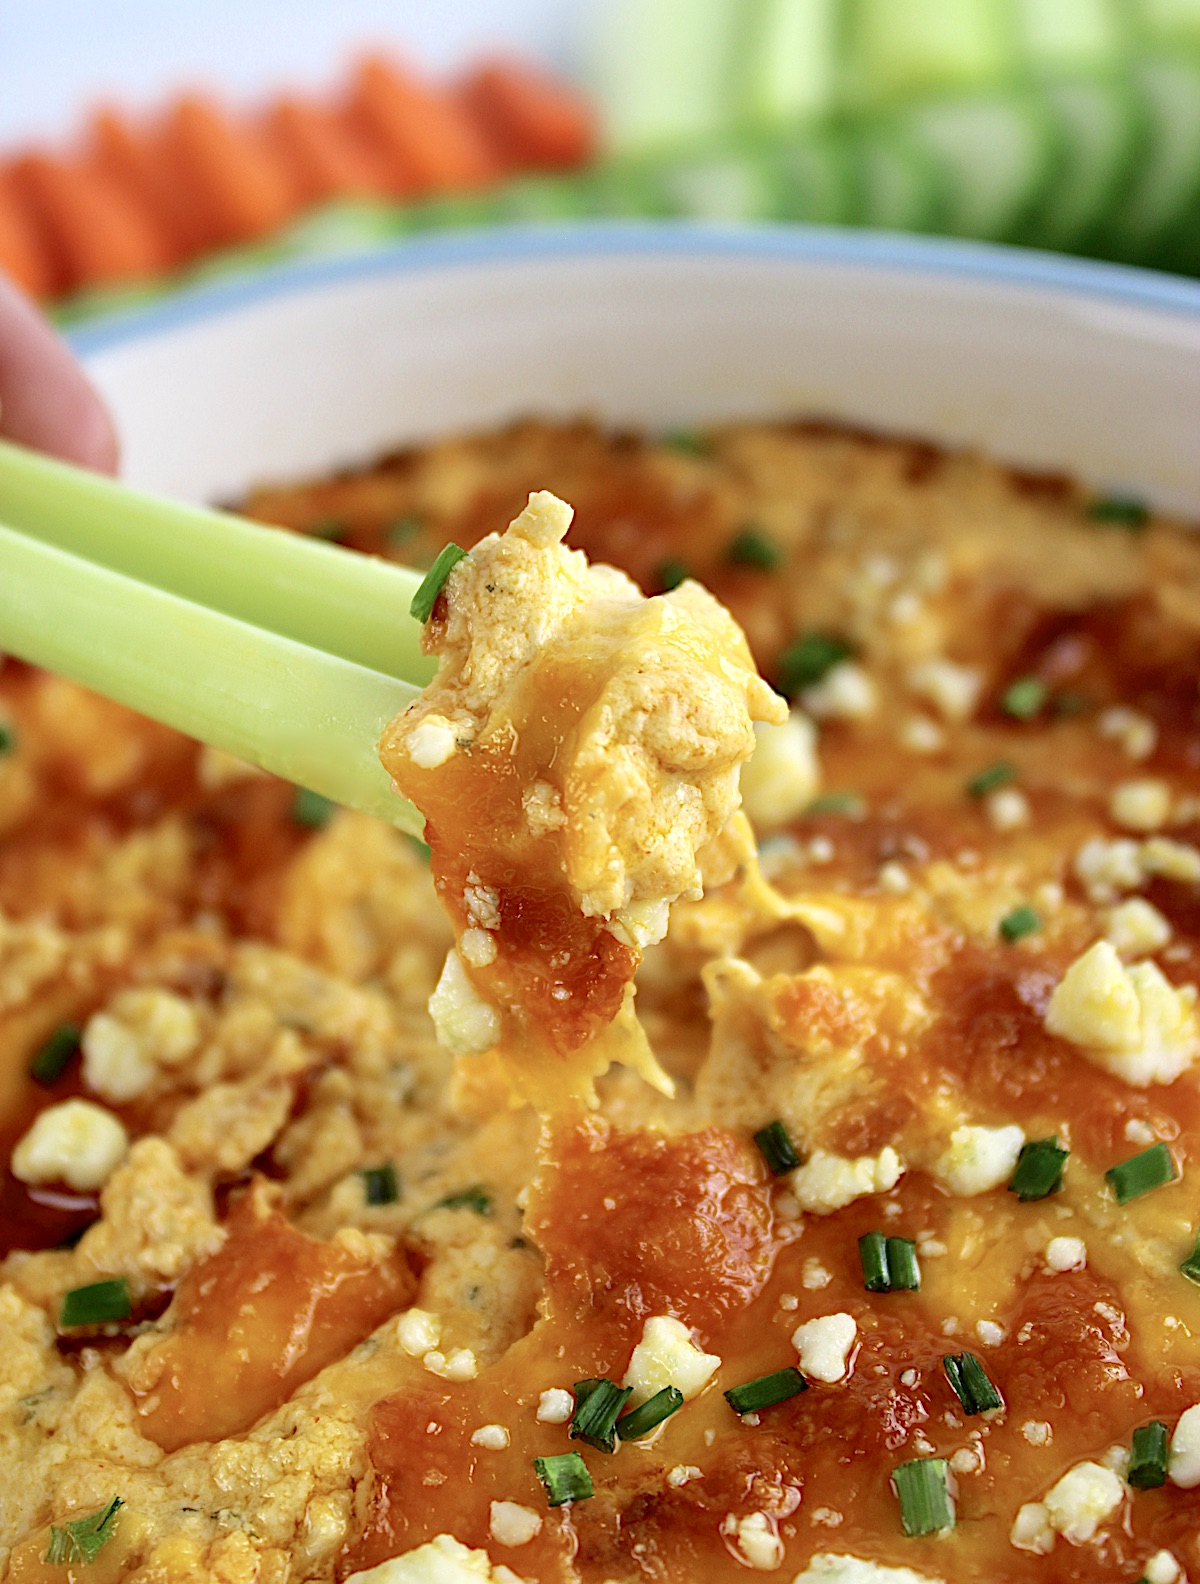 celery stick being dipped into Buffalo Chicken Dip